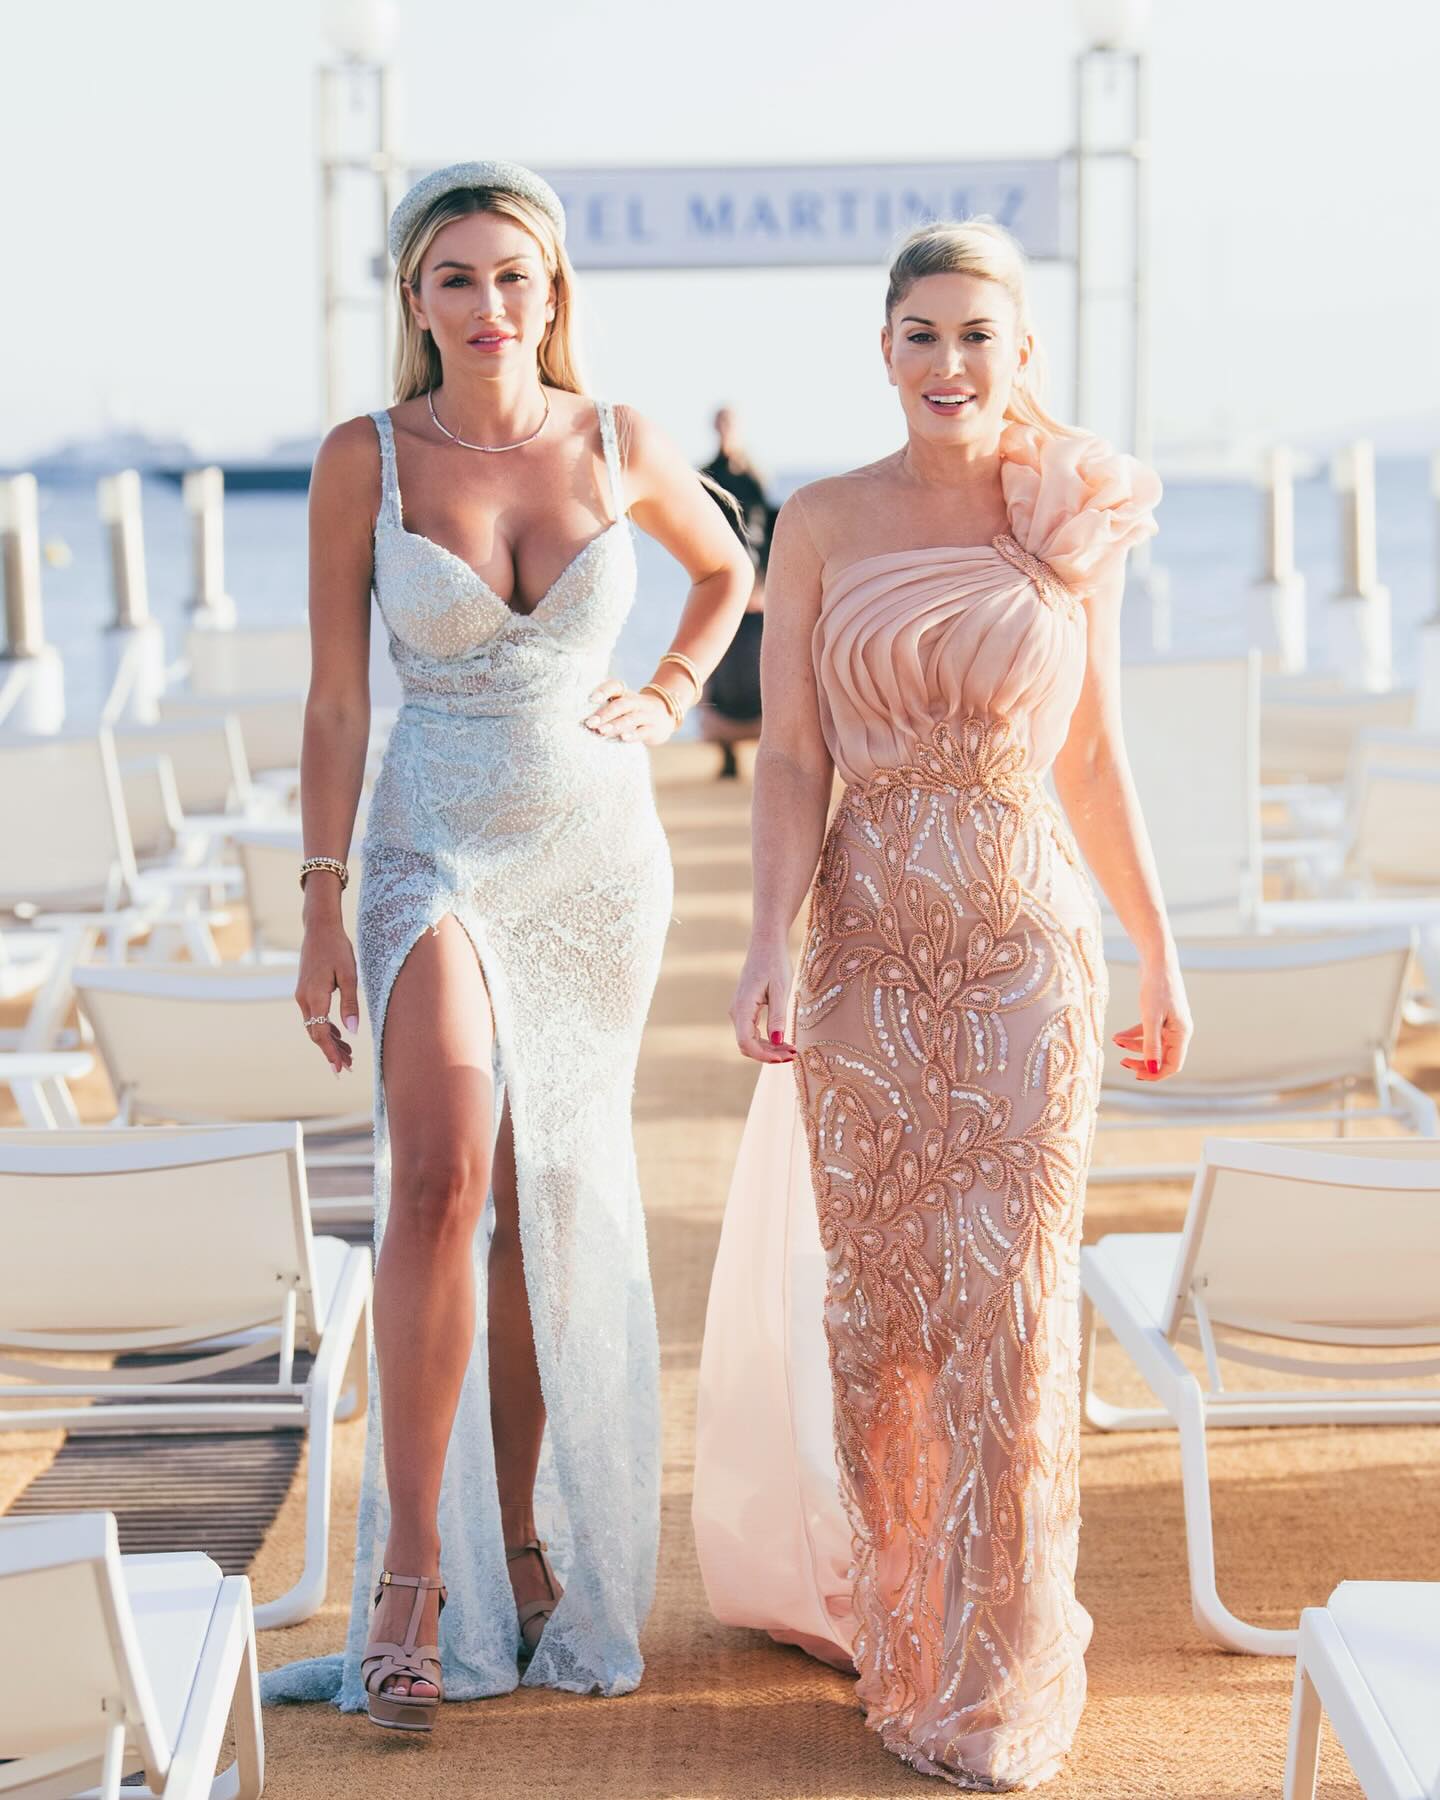 Happy bday to my sister from another mister @khloe 🎂🥳🥂🥳
You’ve done more in your short life than most people do in lifetimes. I can’t wait for our adventures around the globe to continue! This birthday is even more special with the arrival of Ocean Rose! May you stay blessed and continue to conquer all your dreams!! #happybirthday #loveyou ❤️❤️